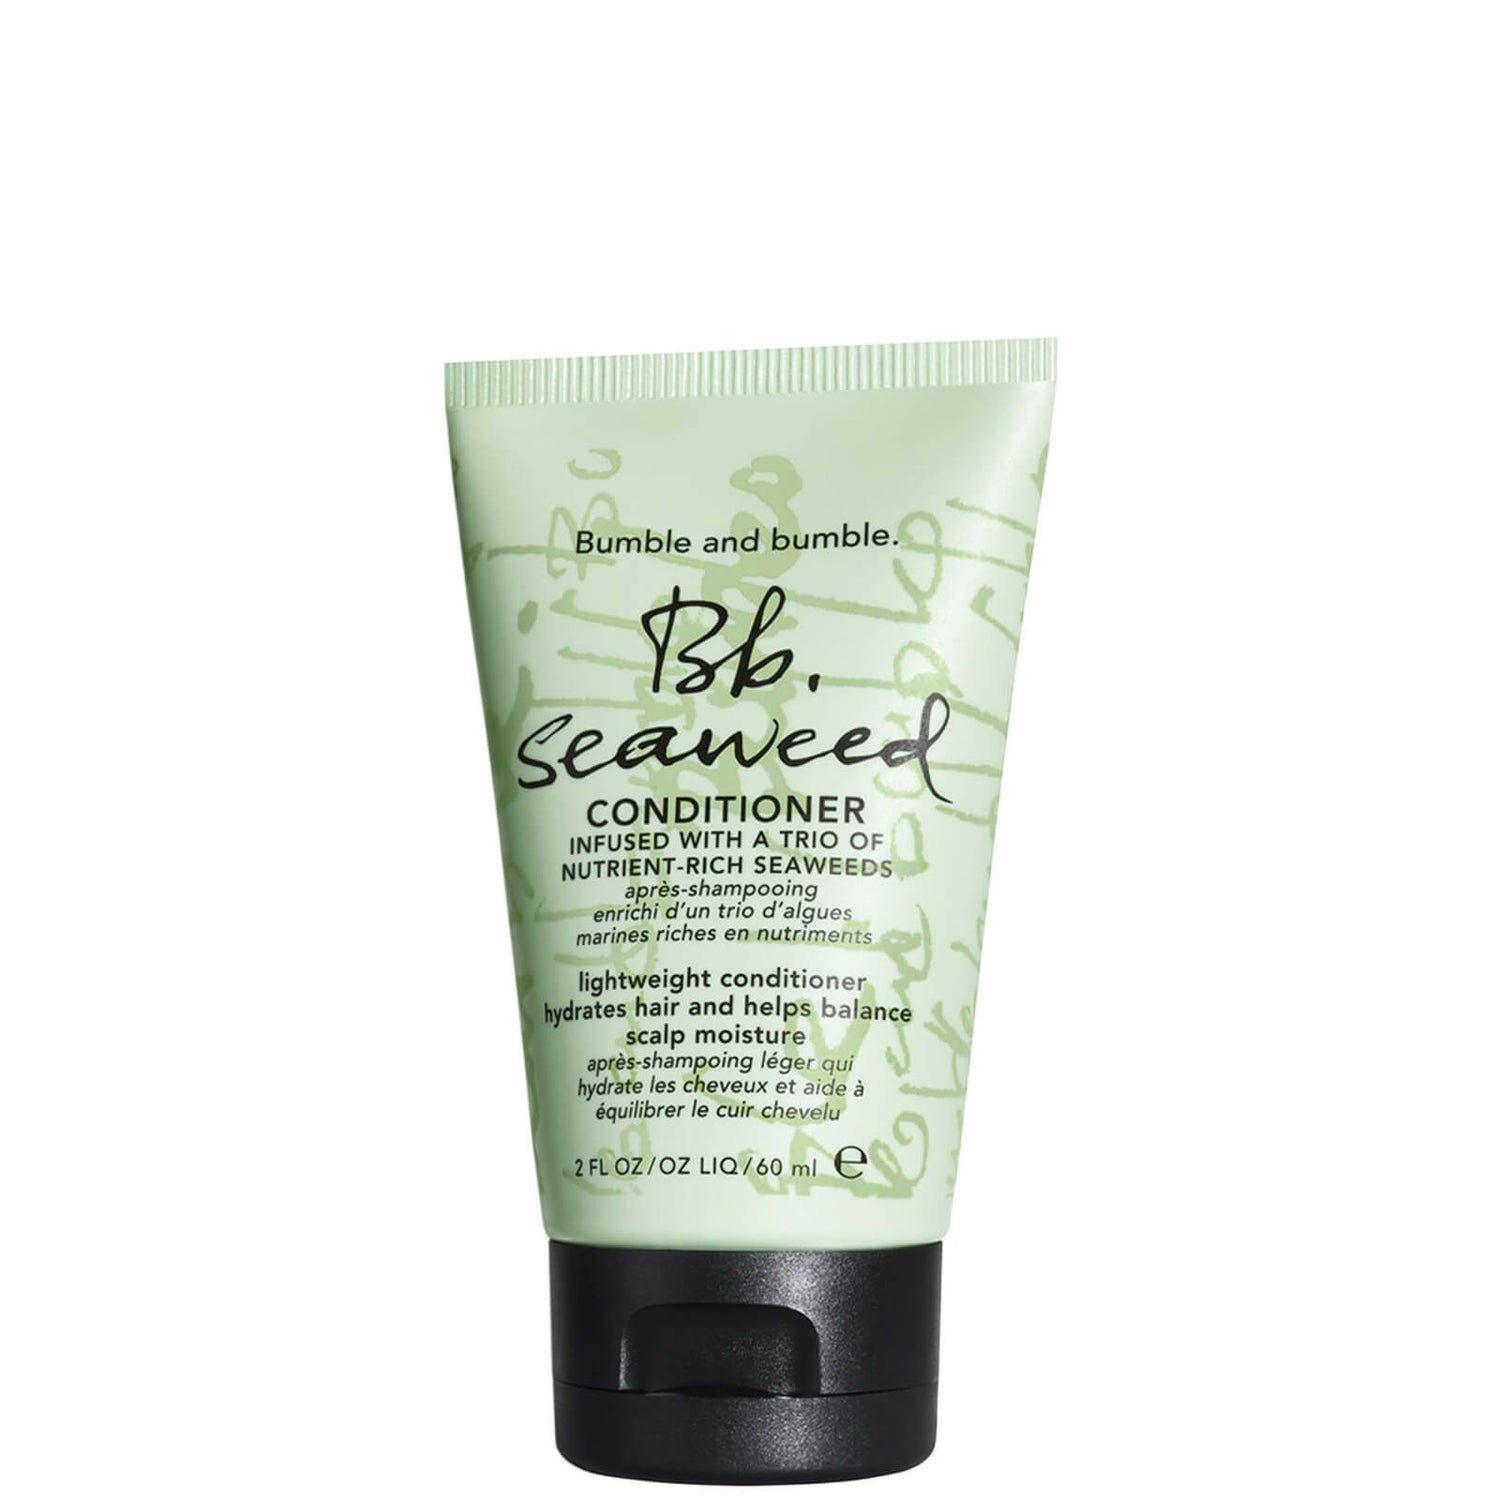 Bumble and bumble Seaweed Conditioner 60ml